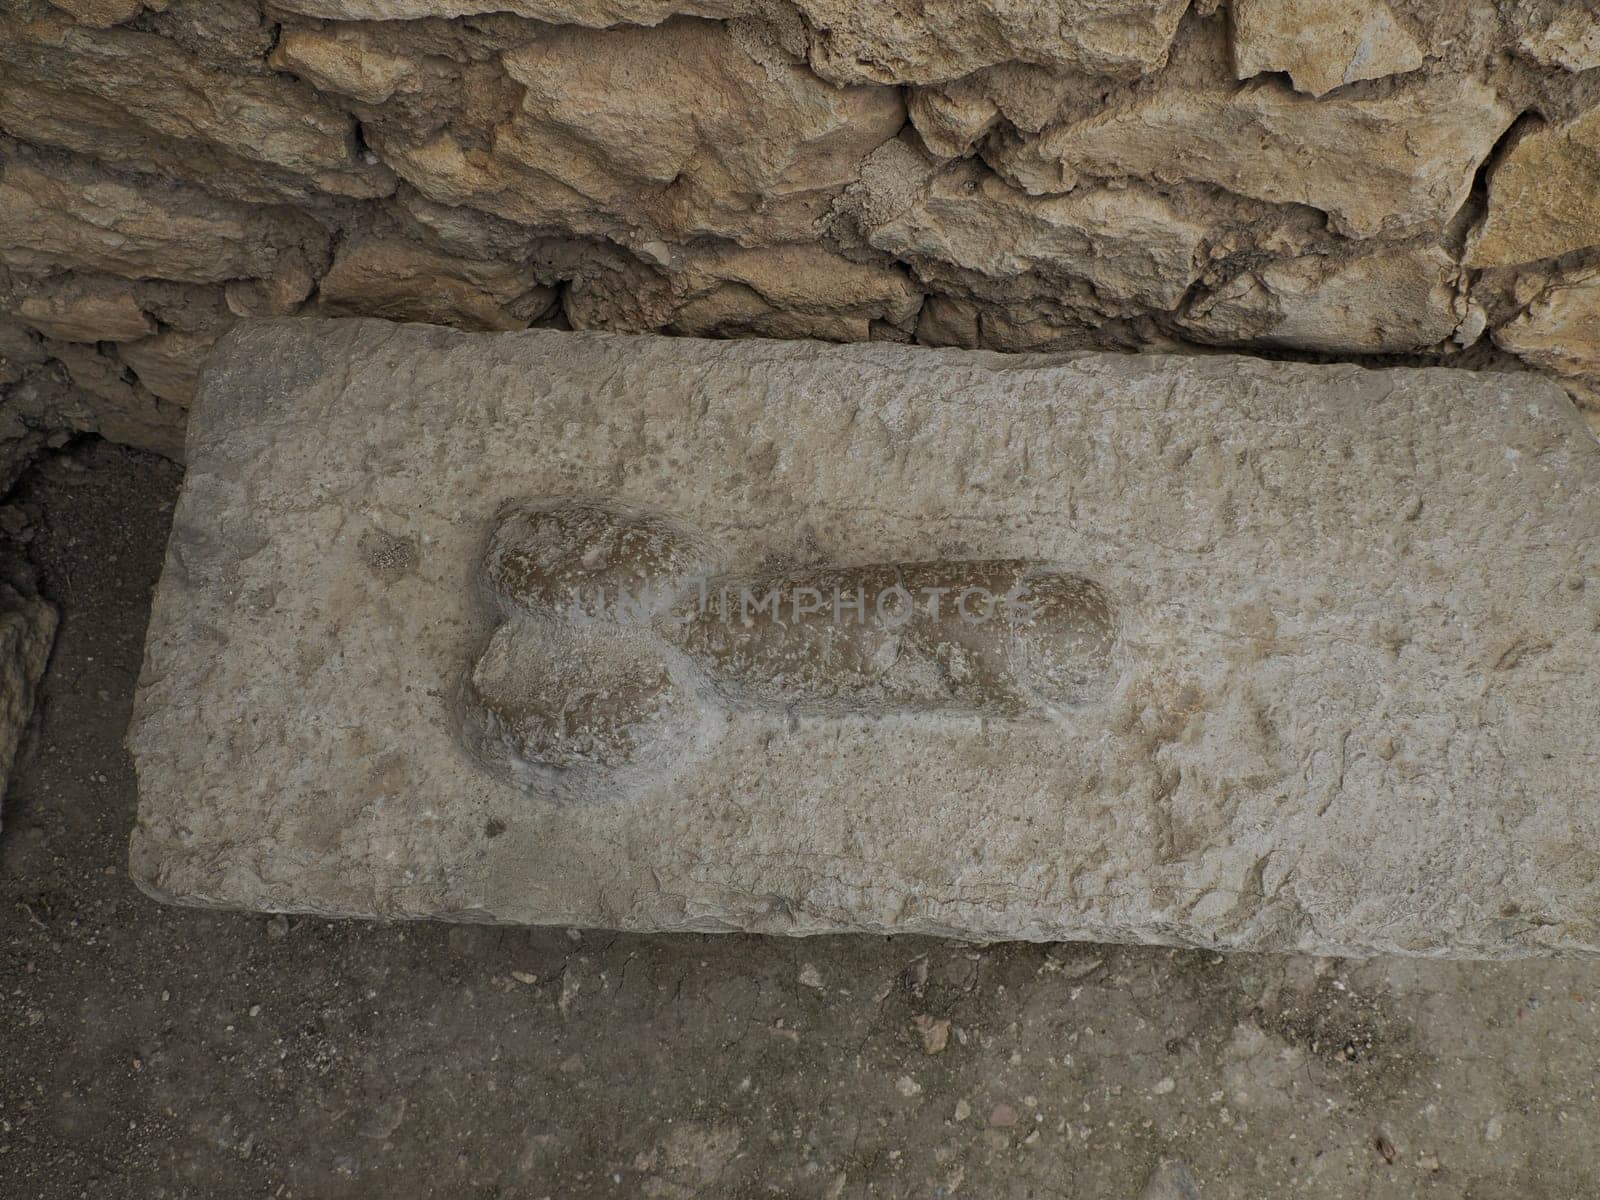 brothel penis sign at Volubilis Roman ruins in Morocco- Best-preserved Roman ruins located between the Imperial Cities of Fez and Meknes on a fertile plain